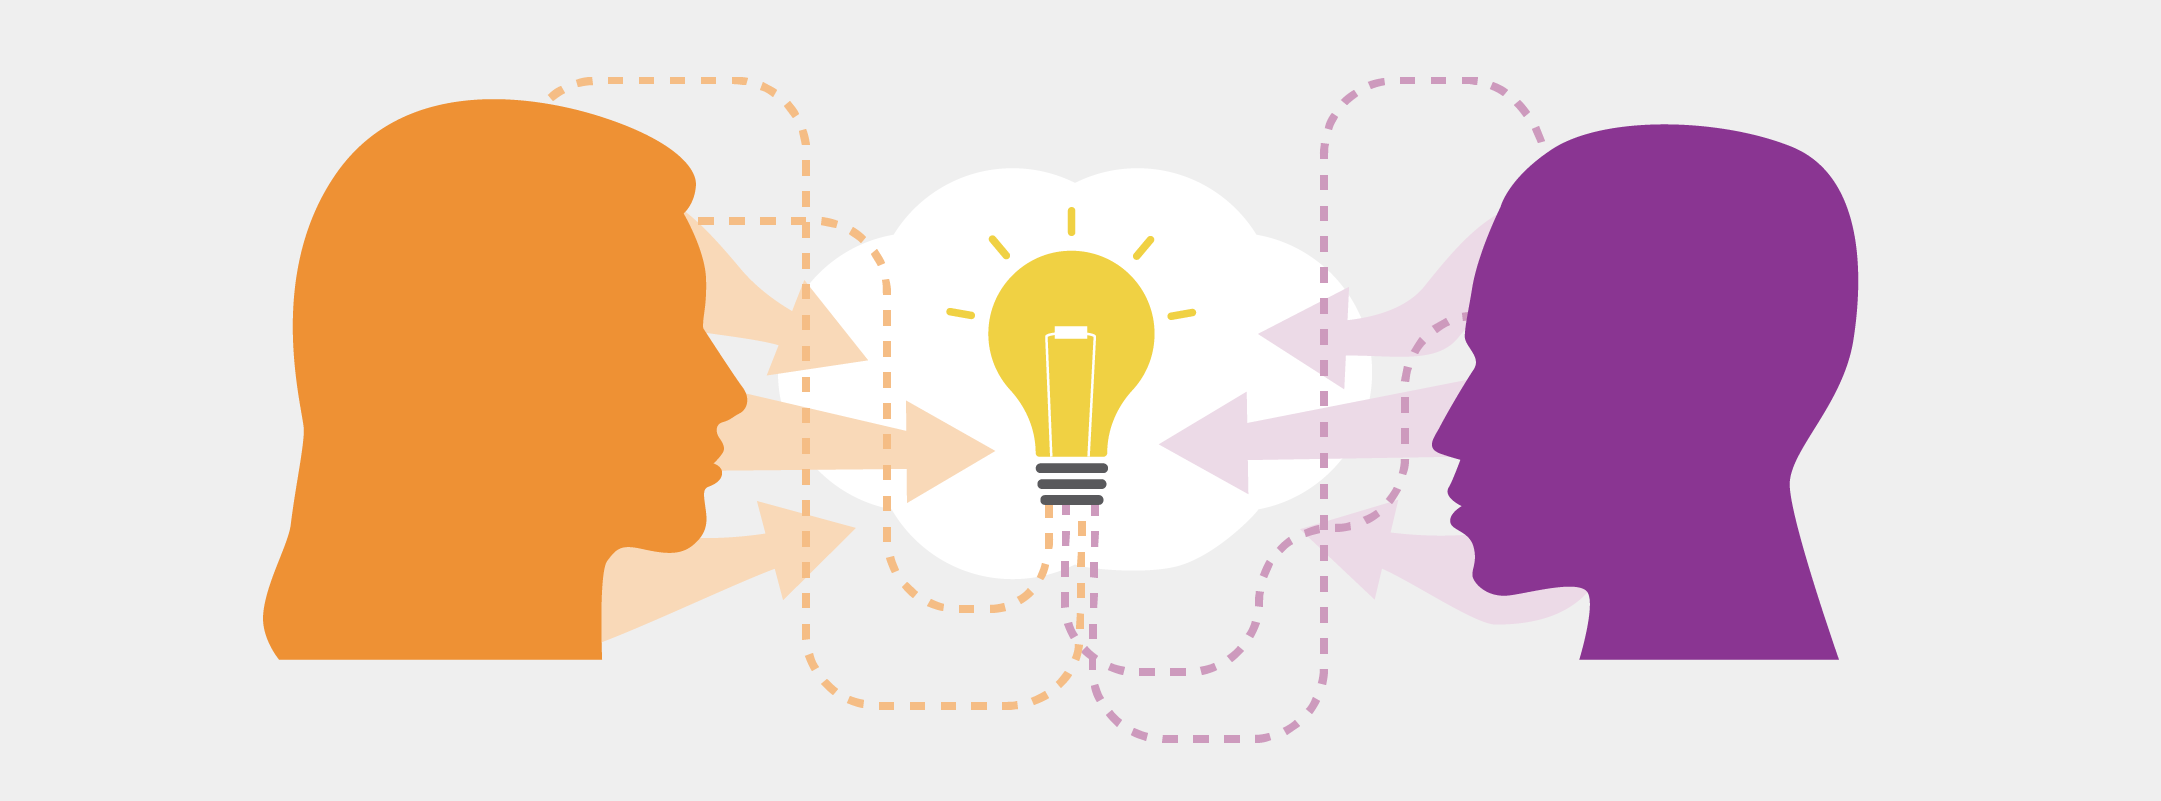 Principal leadership: research to practice header image, showing profiles of two people speaking to each other, forming an idea, as represented by a lightbulb